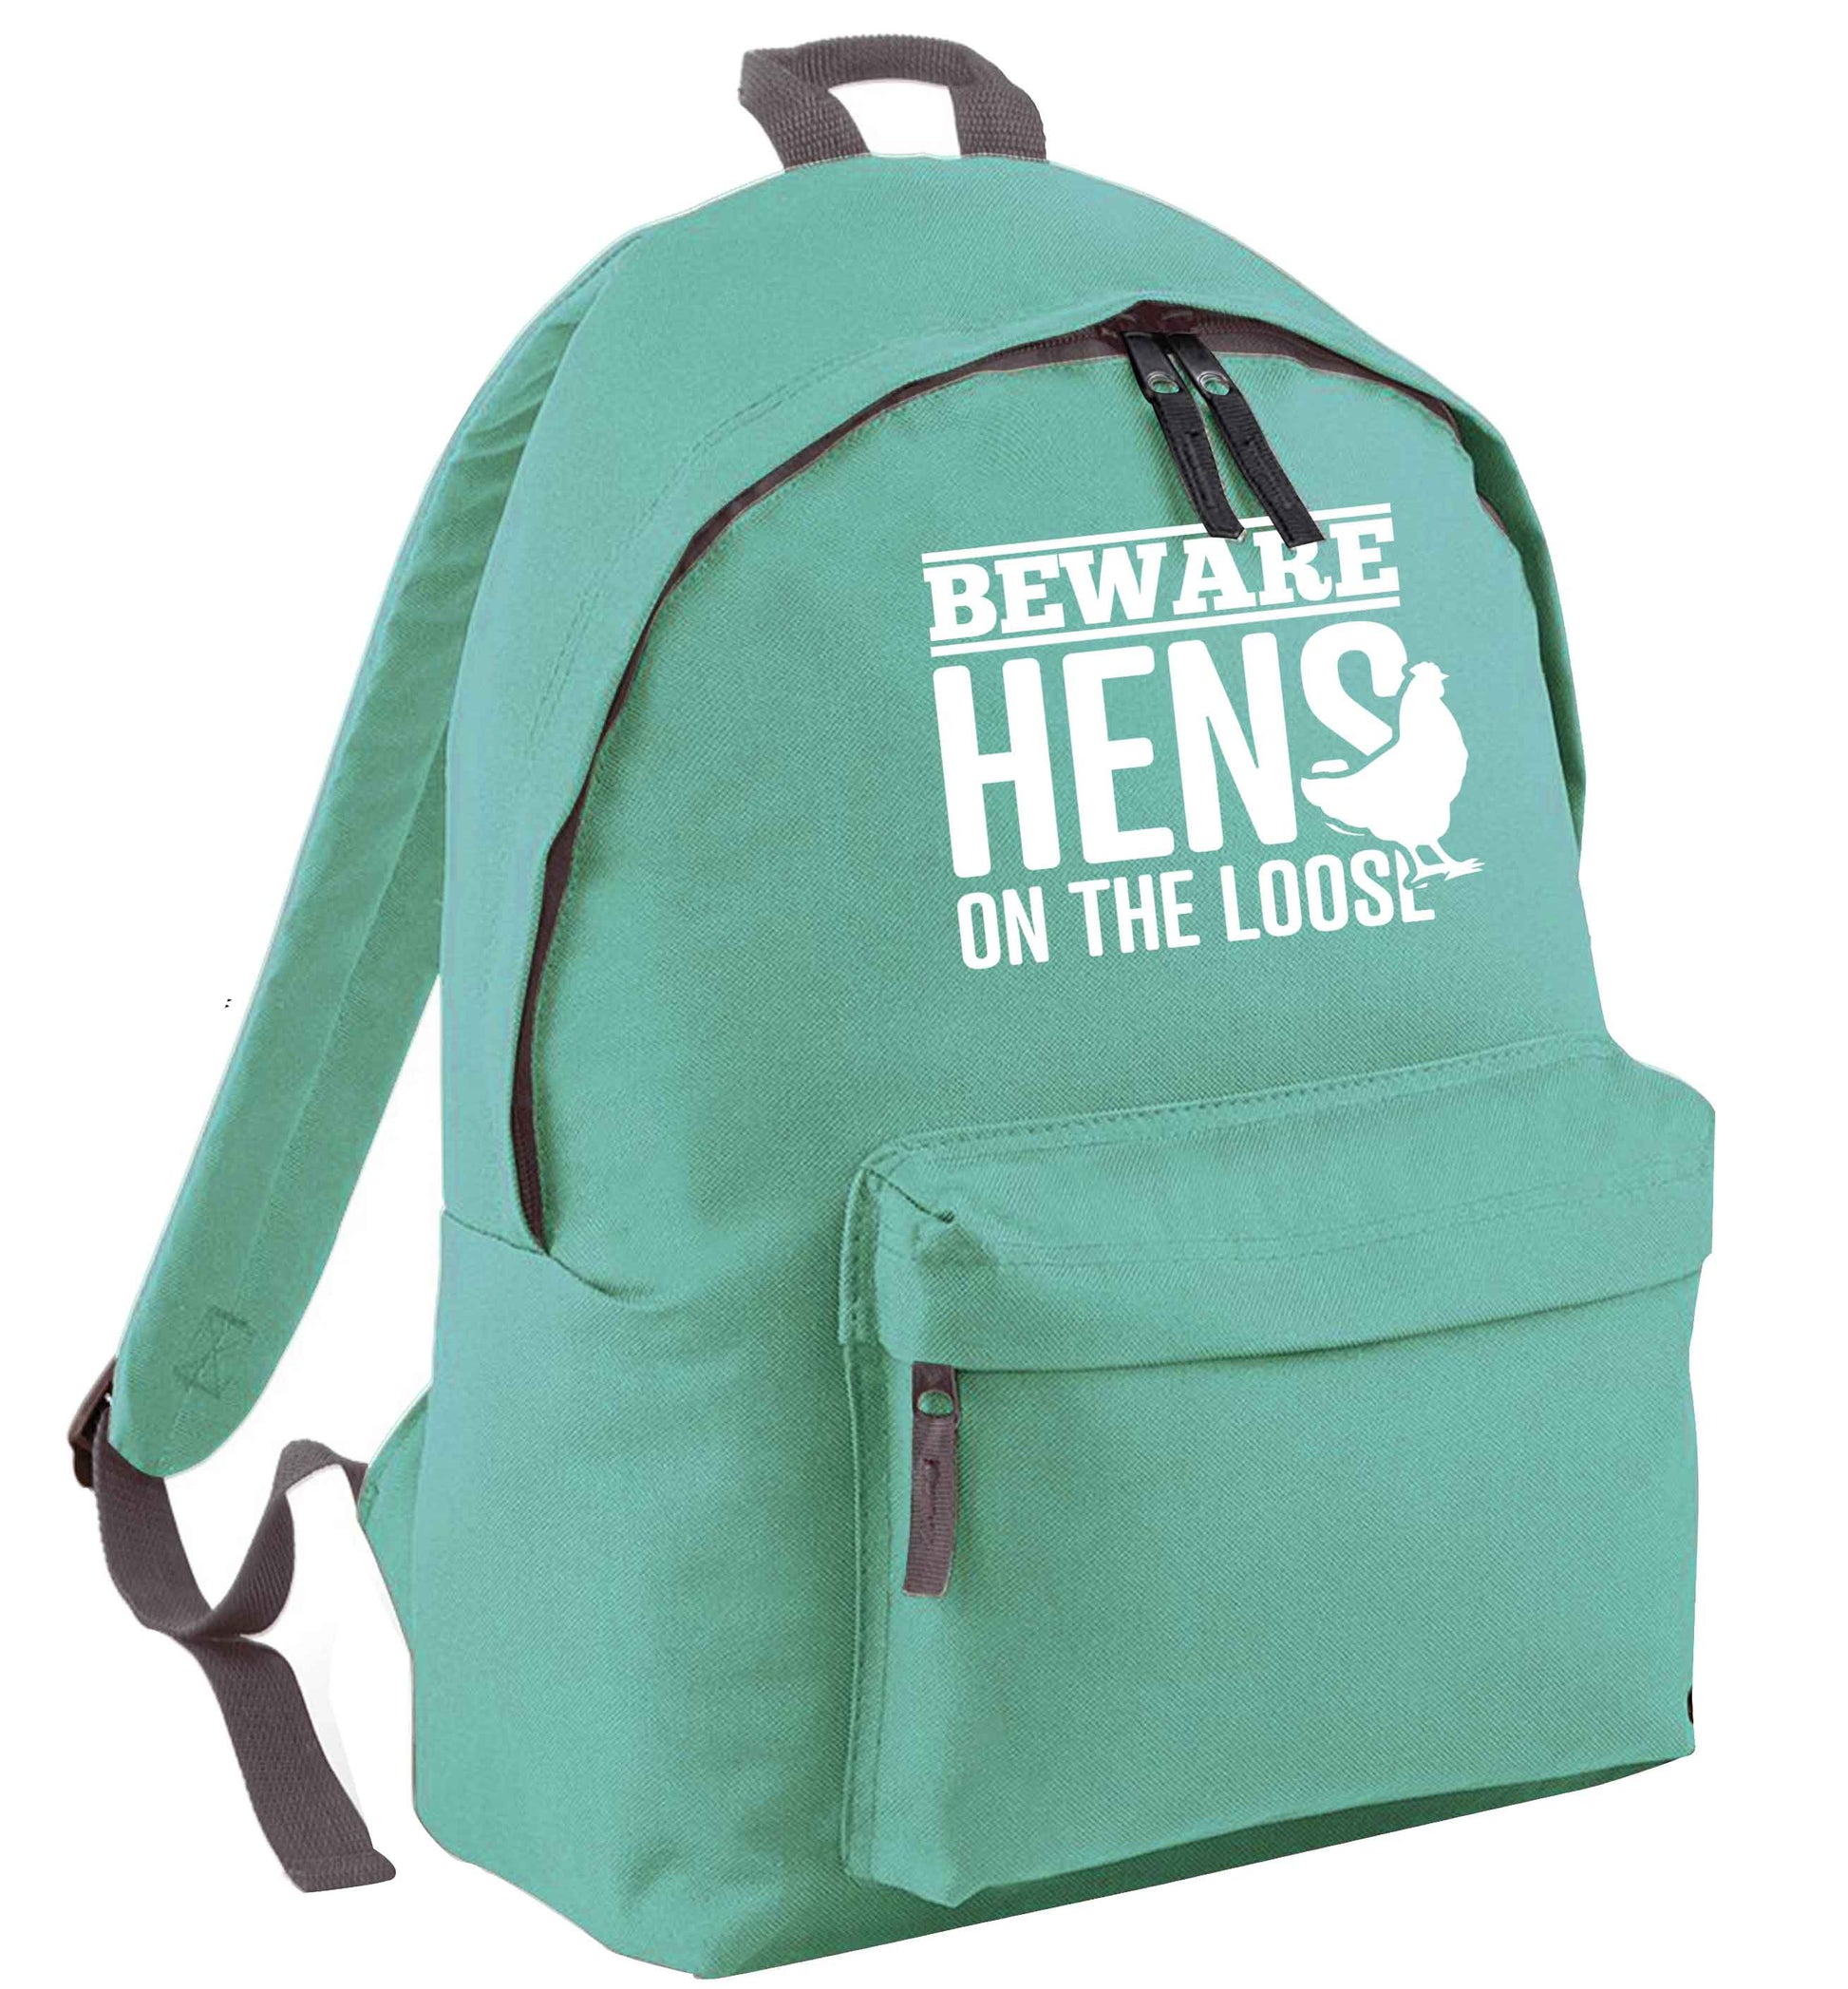 Beware hens on the loose mint adults backpack